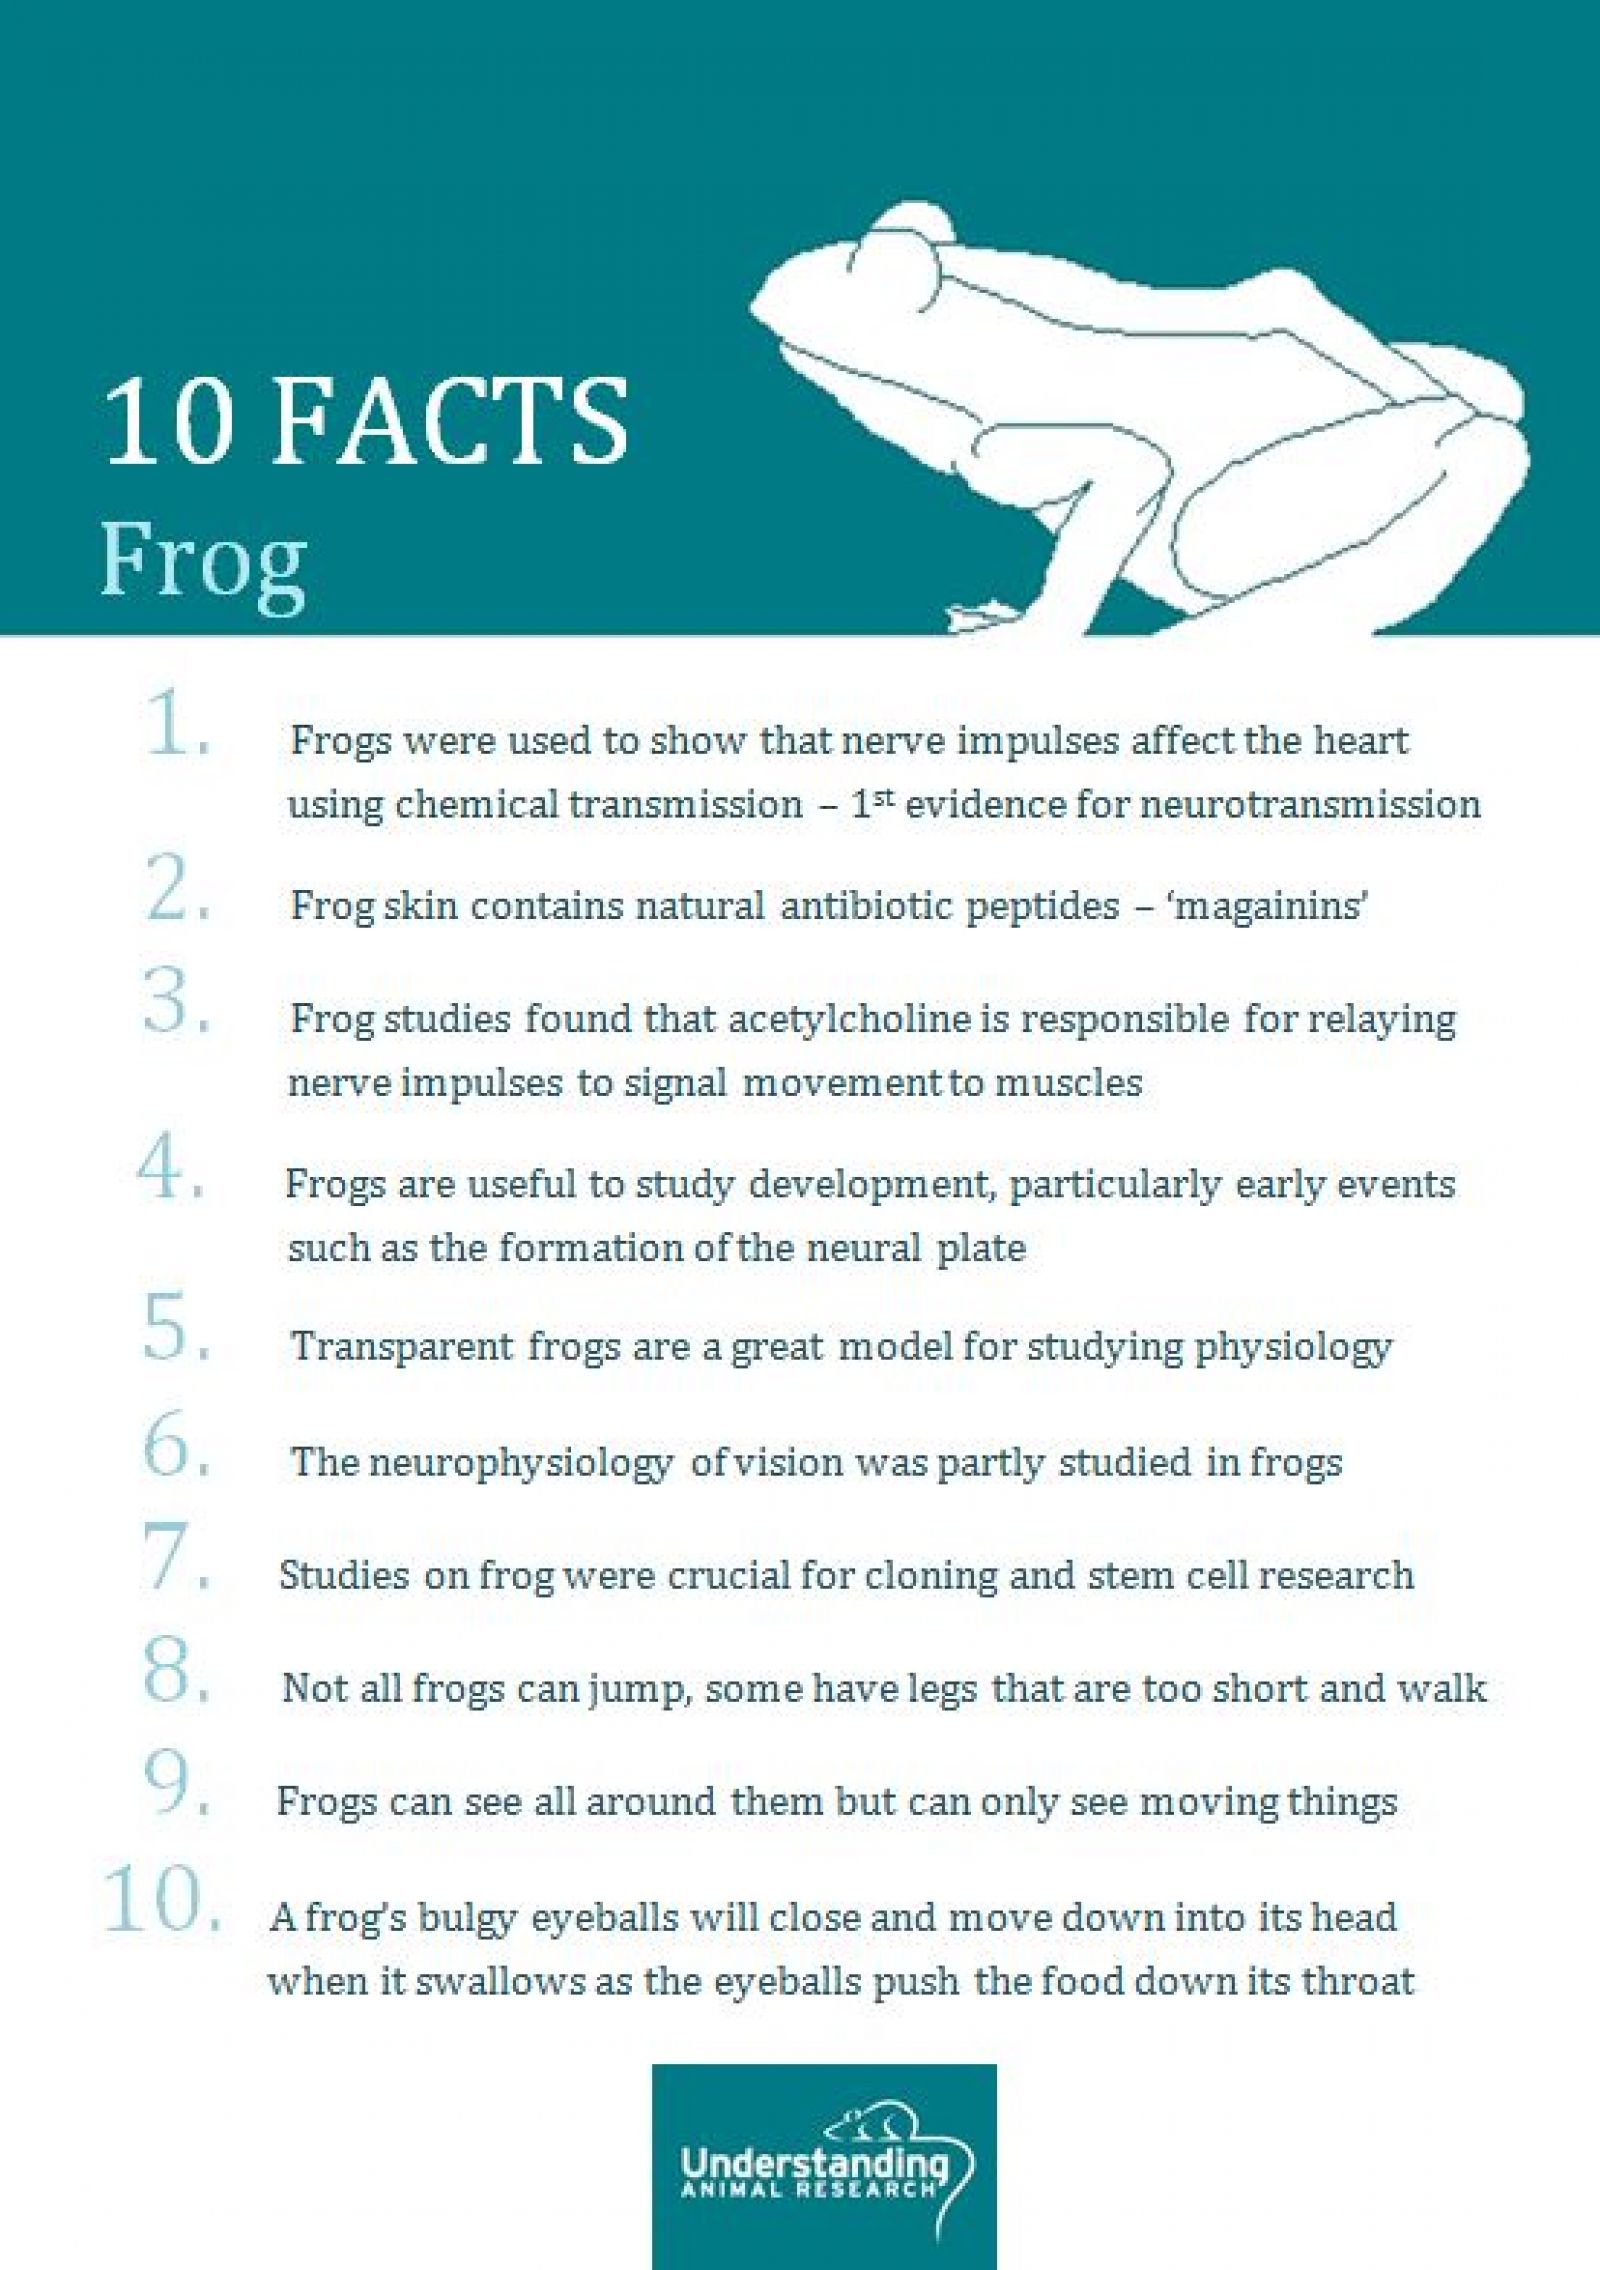 Frog 10 facts